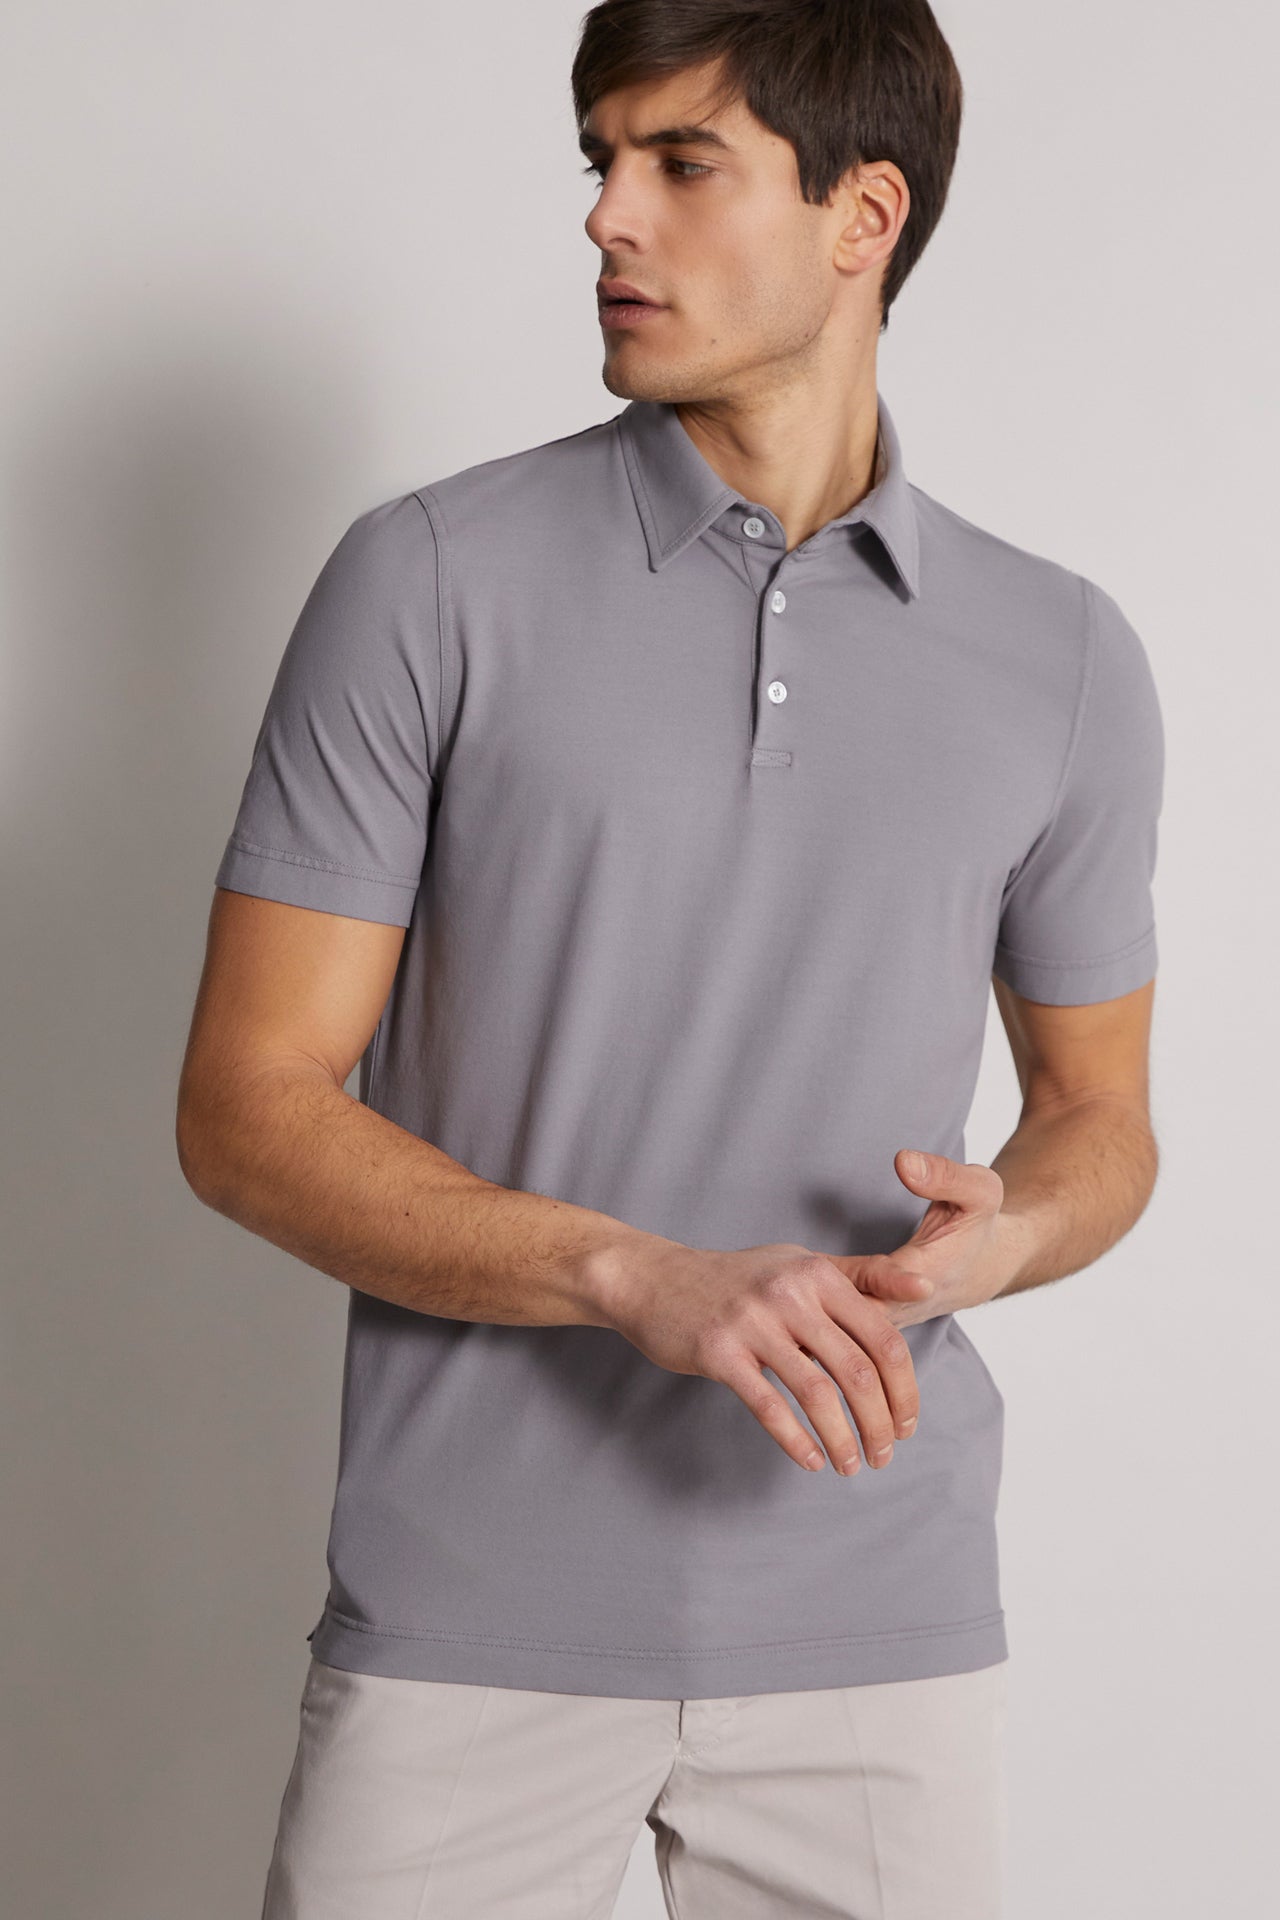 men's iconic cotton polo jersey in light grey